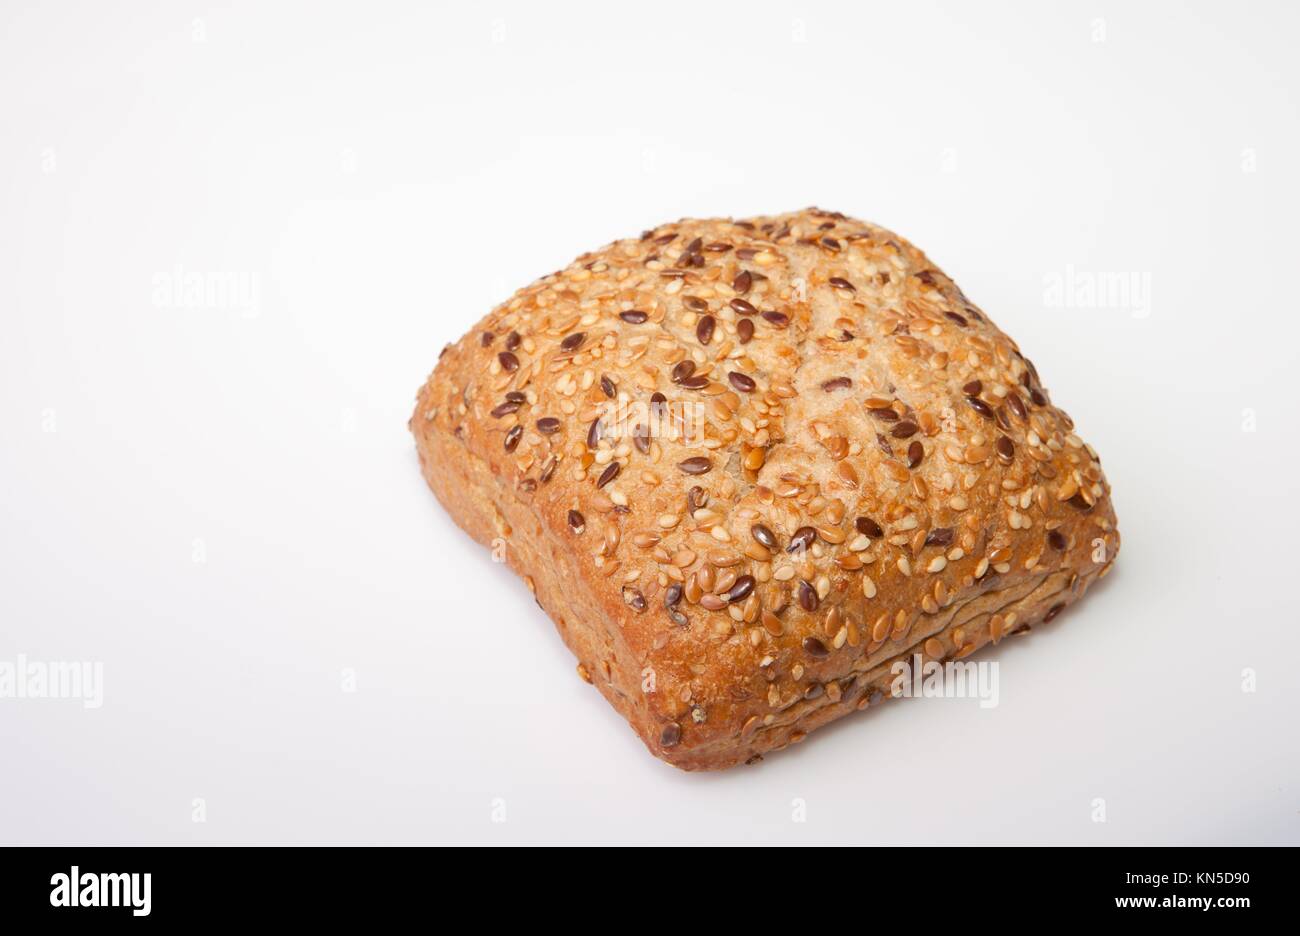 Fresh, squared wholemeal bread with sunflower seeds, sesame and others grains. Isolated over white. Stock Photo